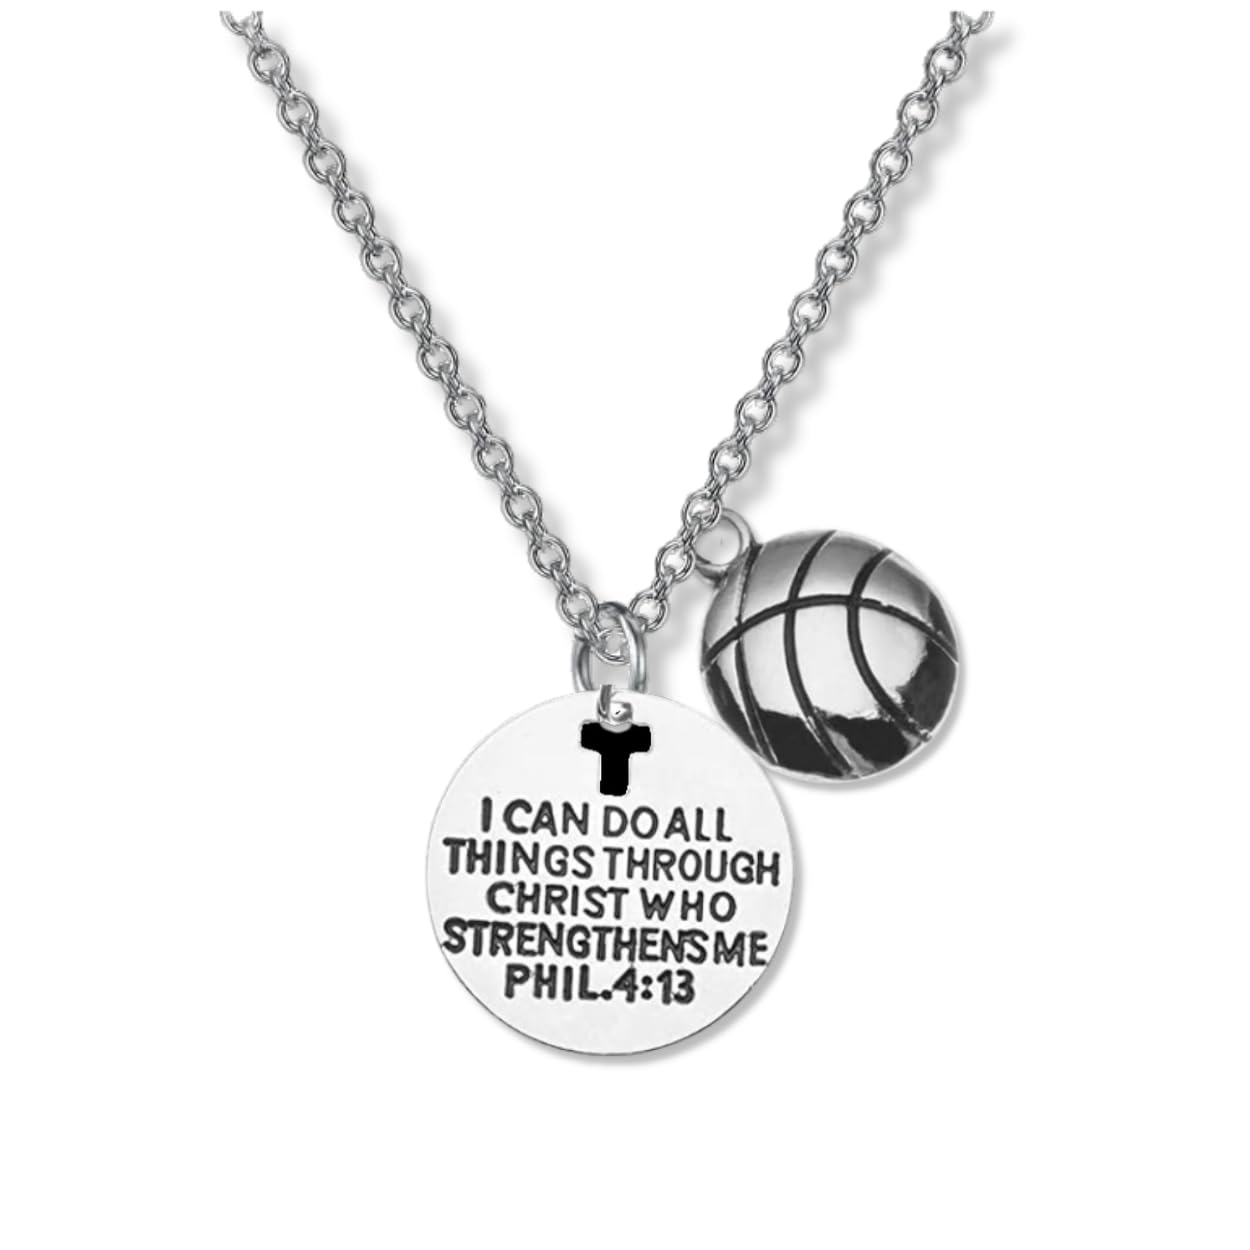 Basketball Necklace, I Can Do All Things Through Christ Who Strengthens Me Phil. 4:13 Pendent, Scripture Jewelry Christian Gifts Verse Bible Gift, Basketball Players